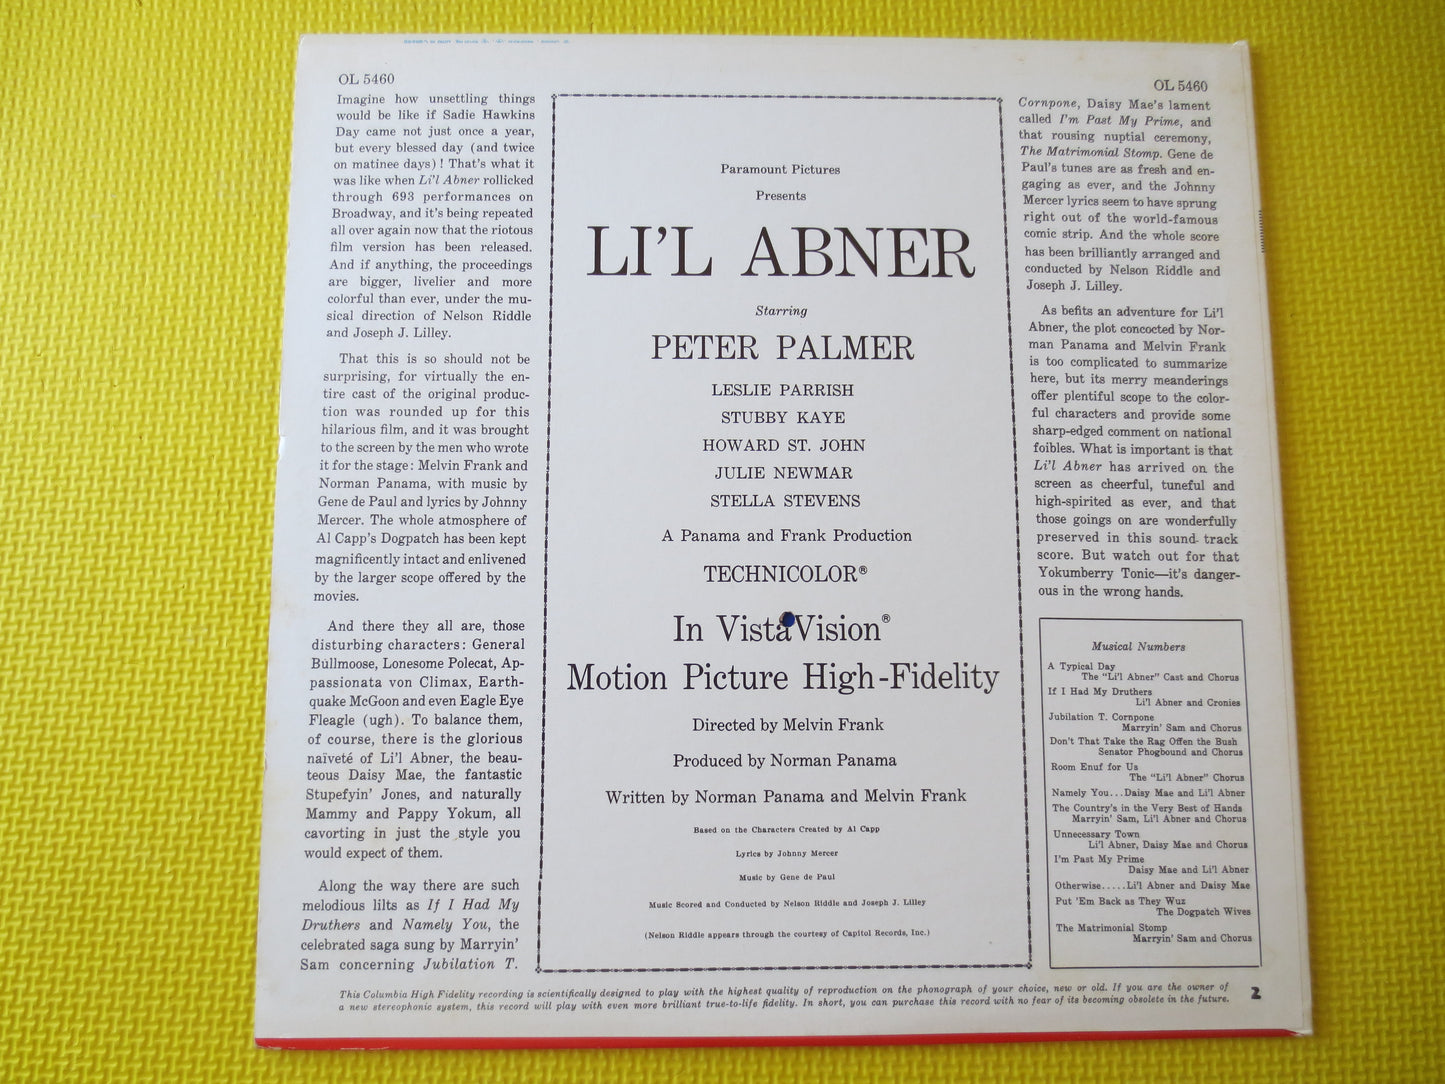 Lil ABNER, SOUNDTRACK Album, Lil ABNER Record, Soundtrack Albums, Screen Albums, Vinyl Lp, lps, Soundtrack Lps, 1959 Record